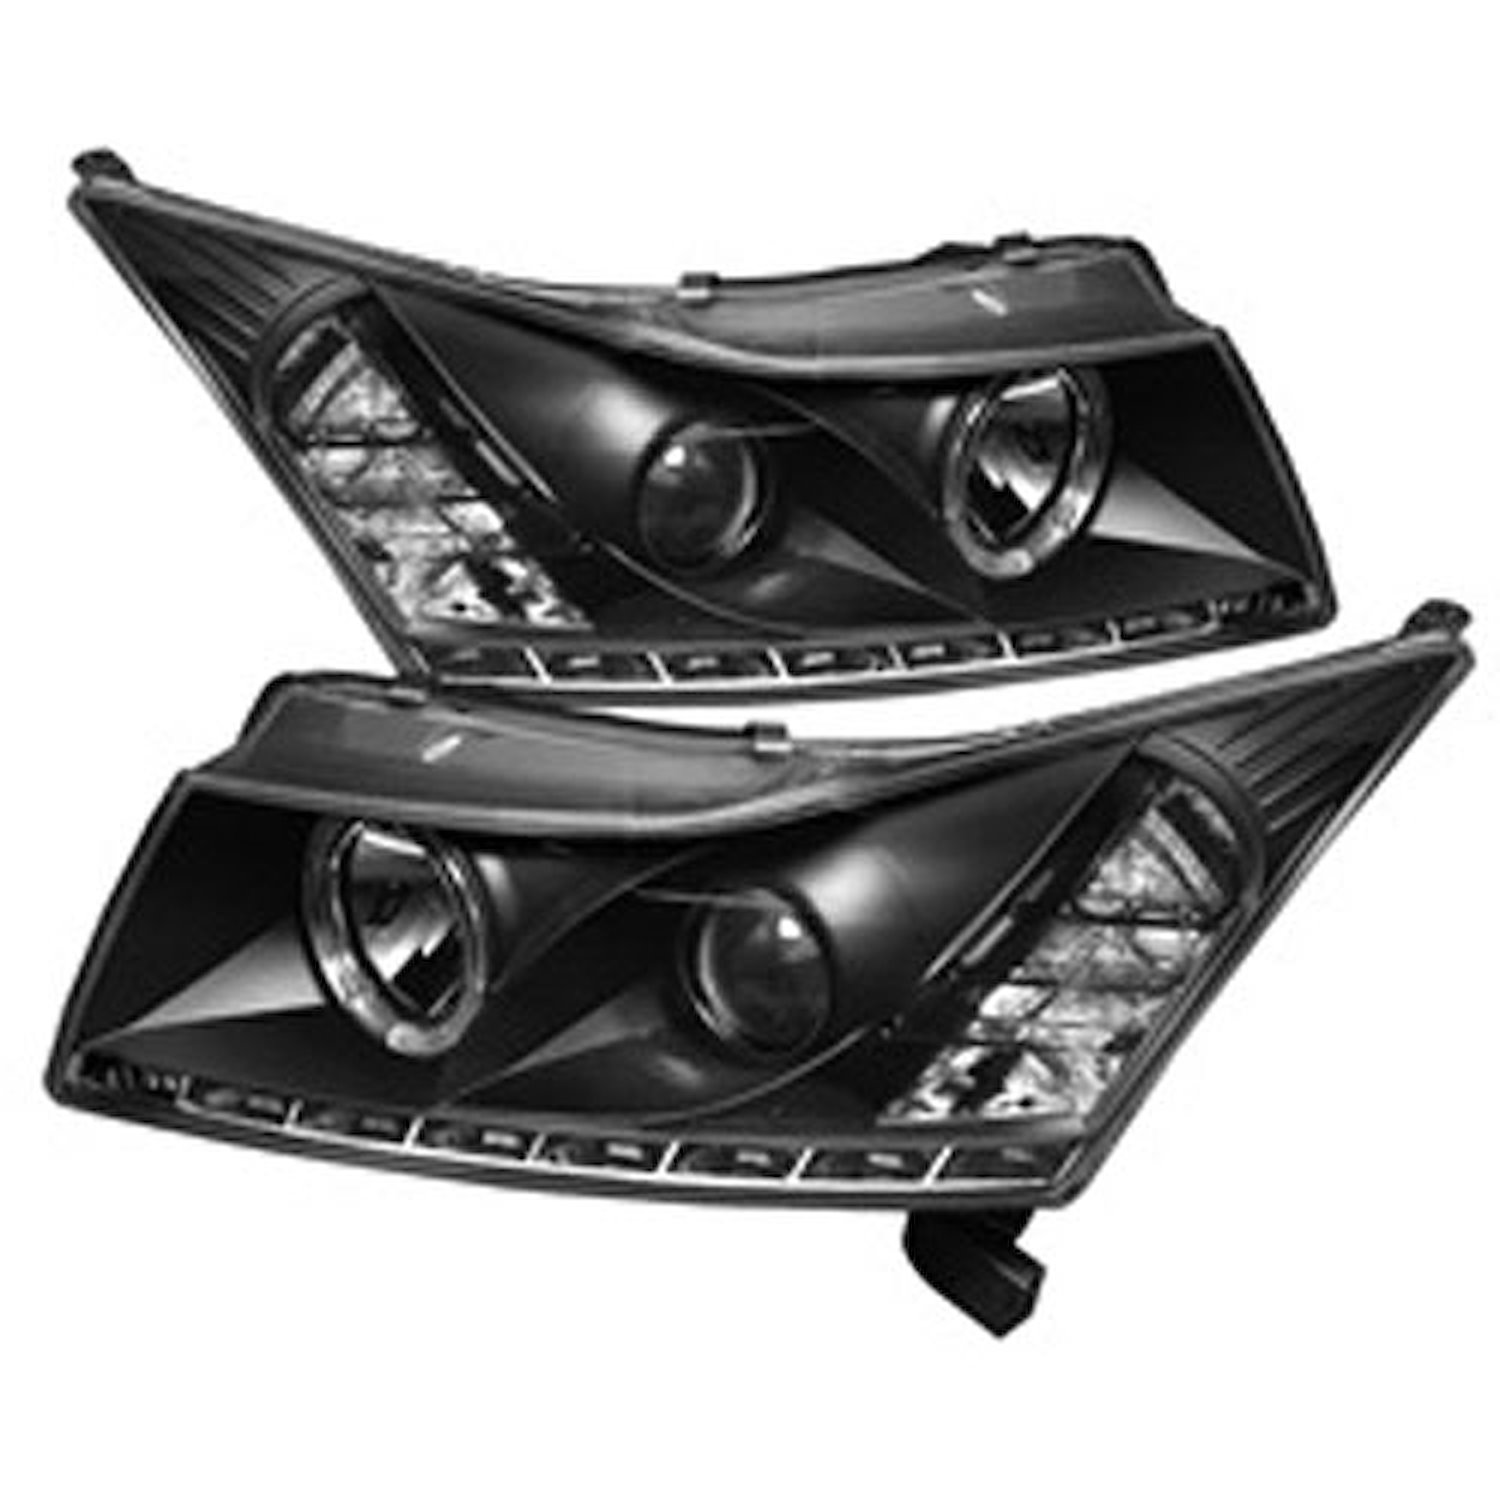 Halo DRL Projector Headlights 2011-2014 Chevy Cruze